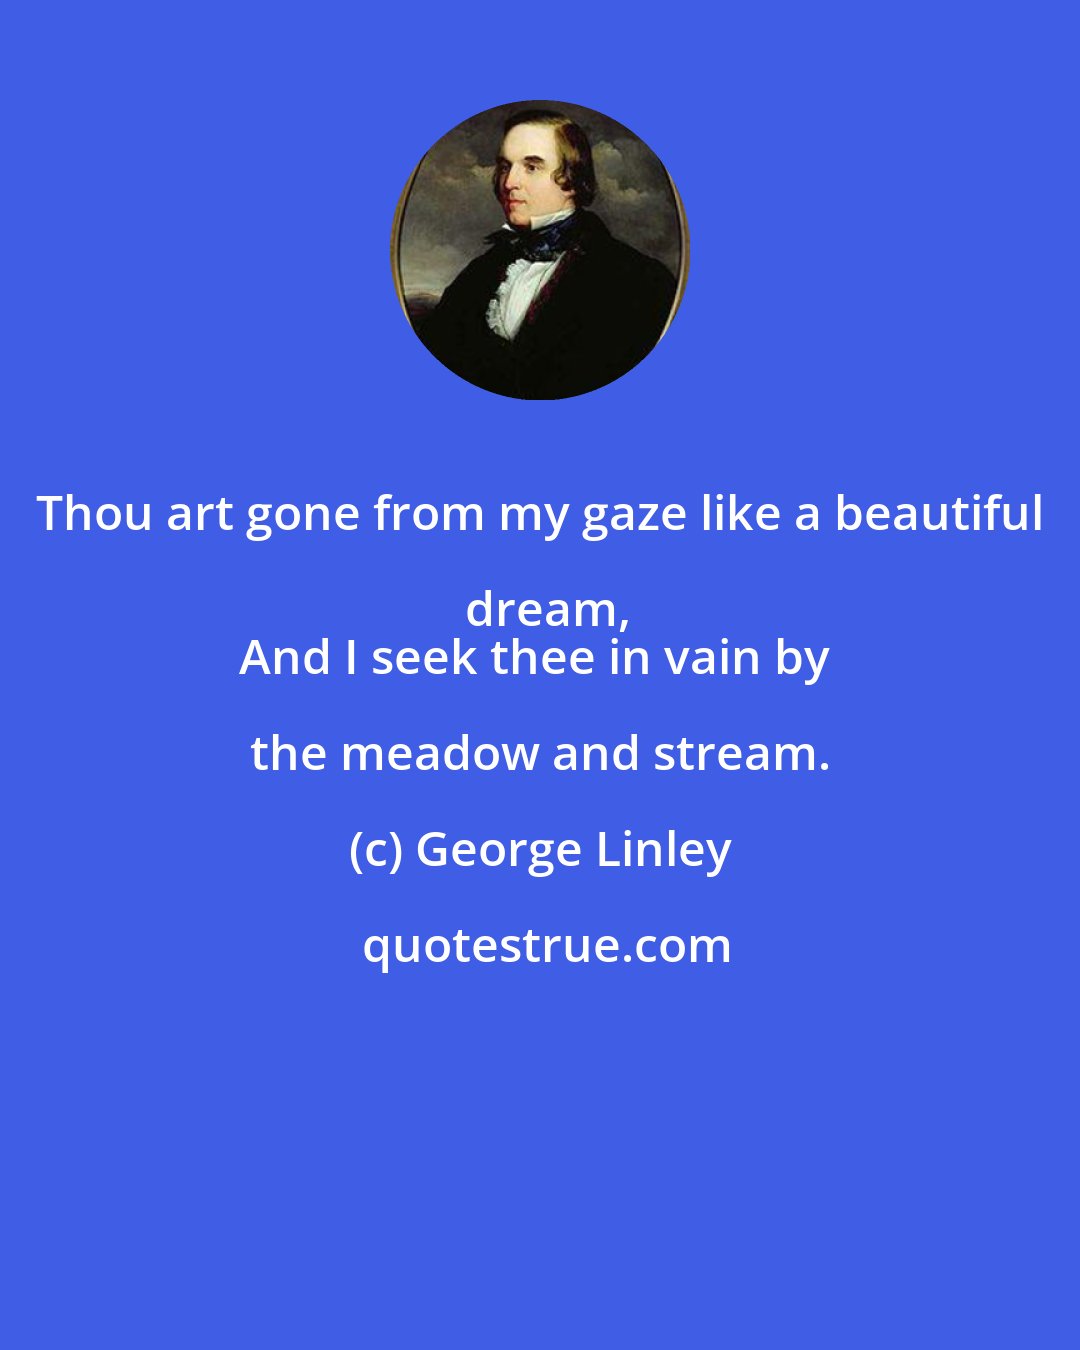 George Linley: Thou art gone from my gaze like a beautiful dream,
And I seek thee in vain by the meadow and stream.